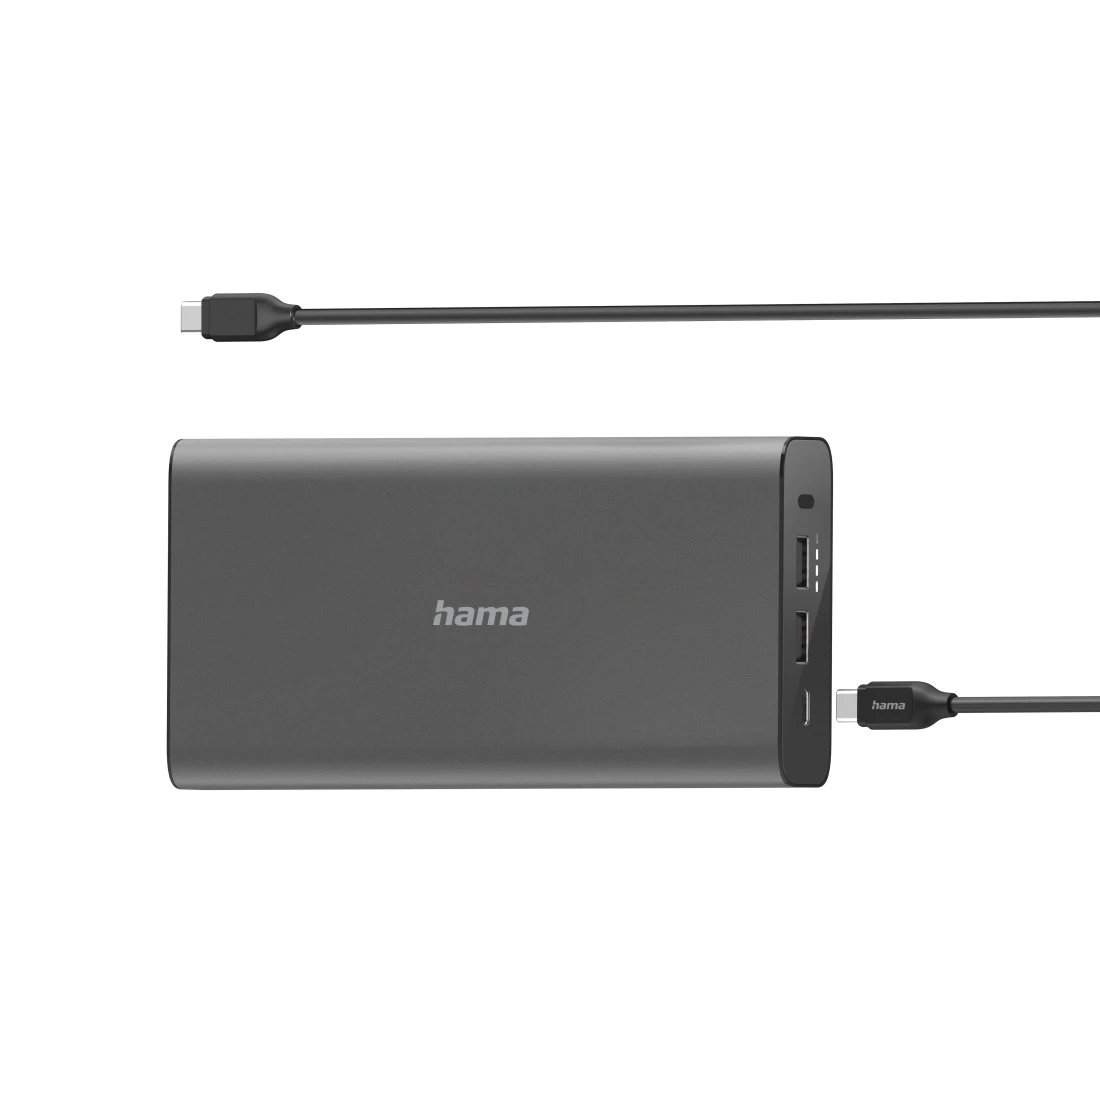 Universal-USB-C-Power-Pack, 26800mAh, Power Delivery (PD), 5-20V/60W | Hama